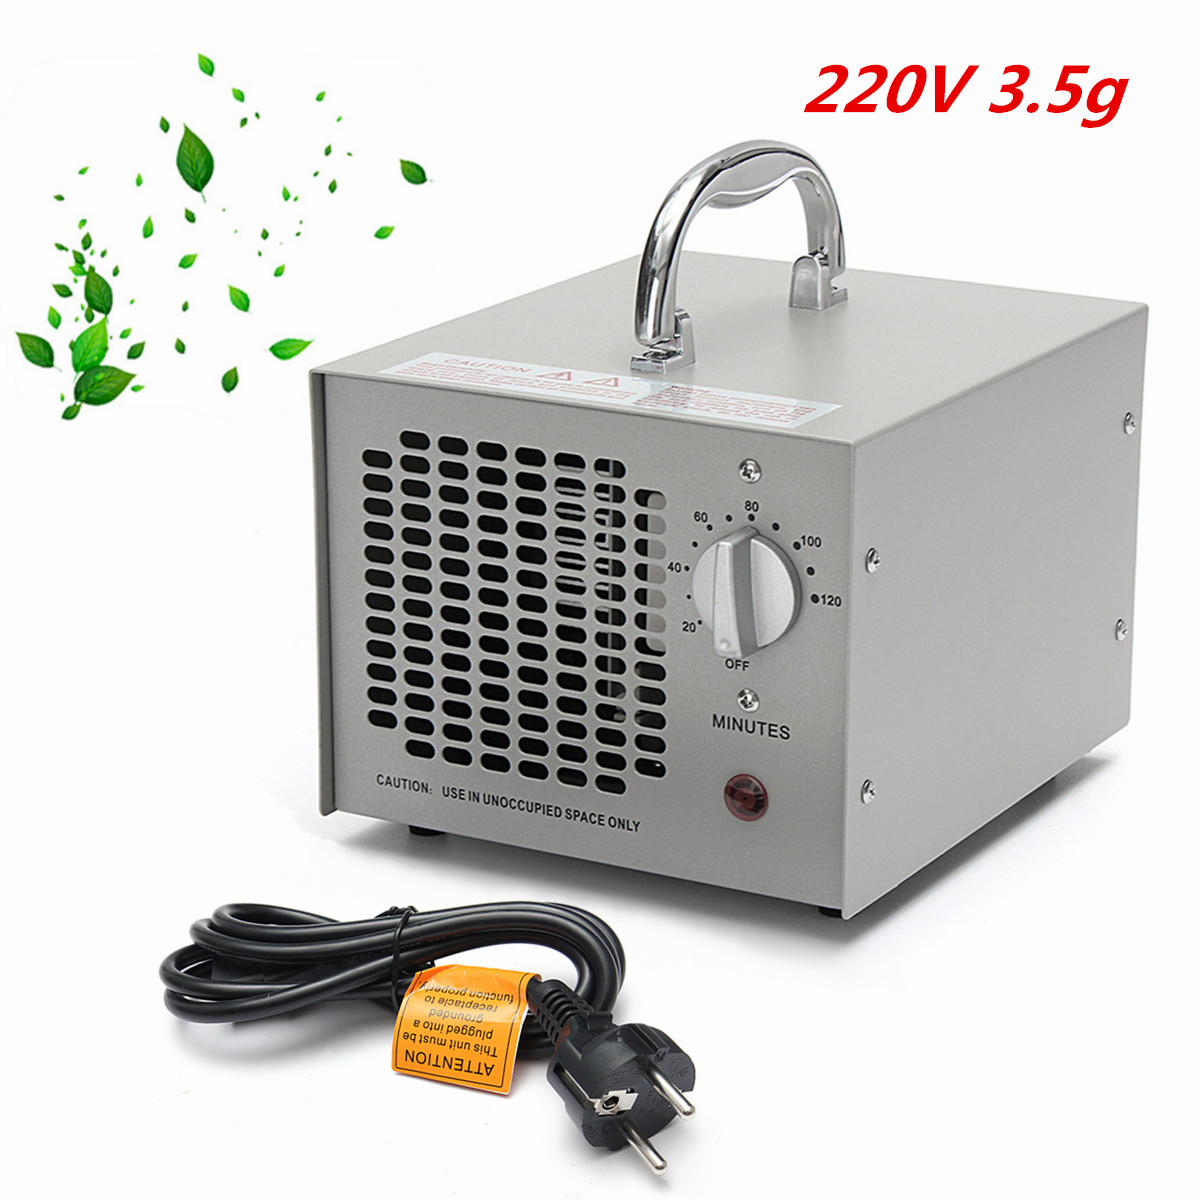 

220V 3500mg Commercial Industrial Ozone Generator Air Purifier Mold Mildew Odor Remover Grey